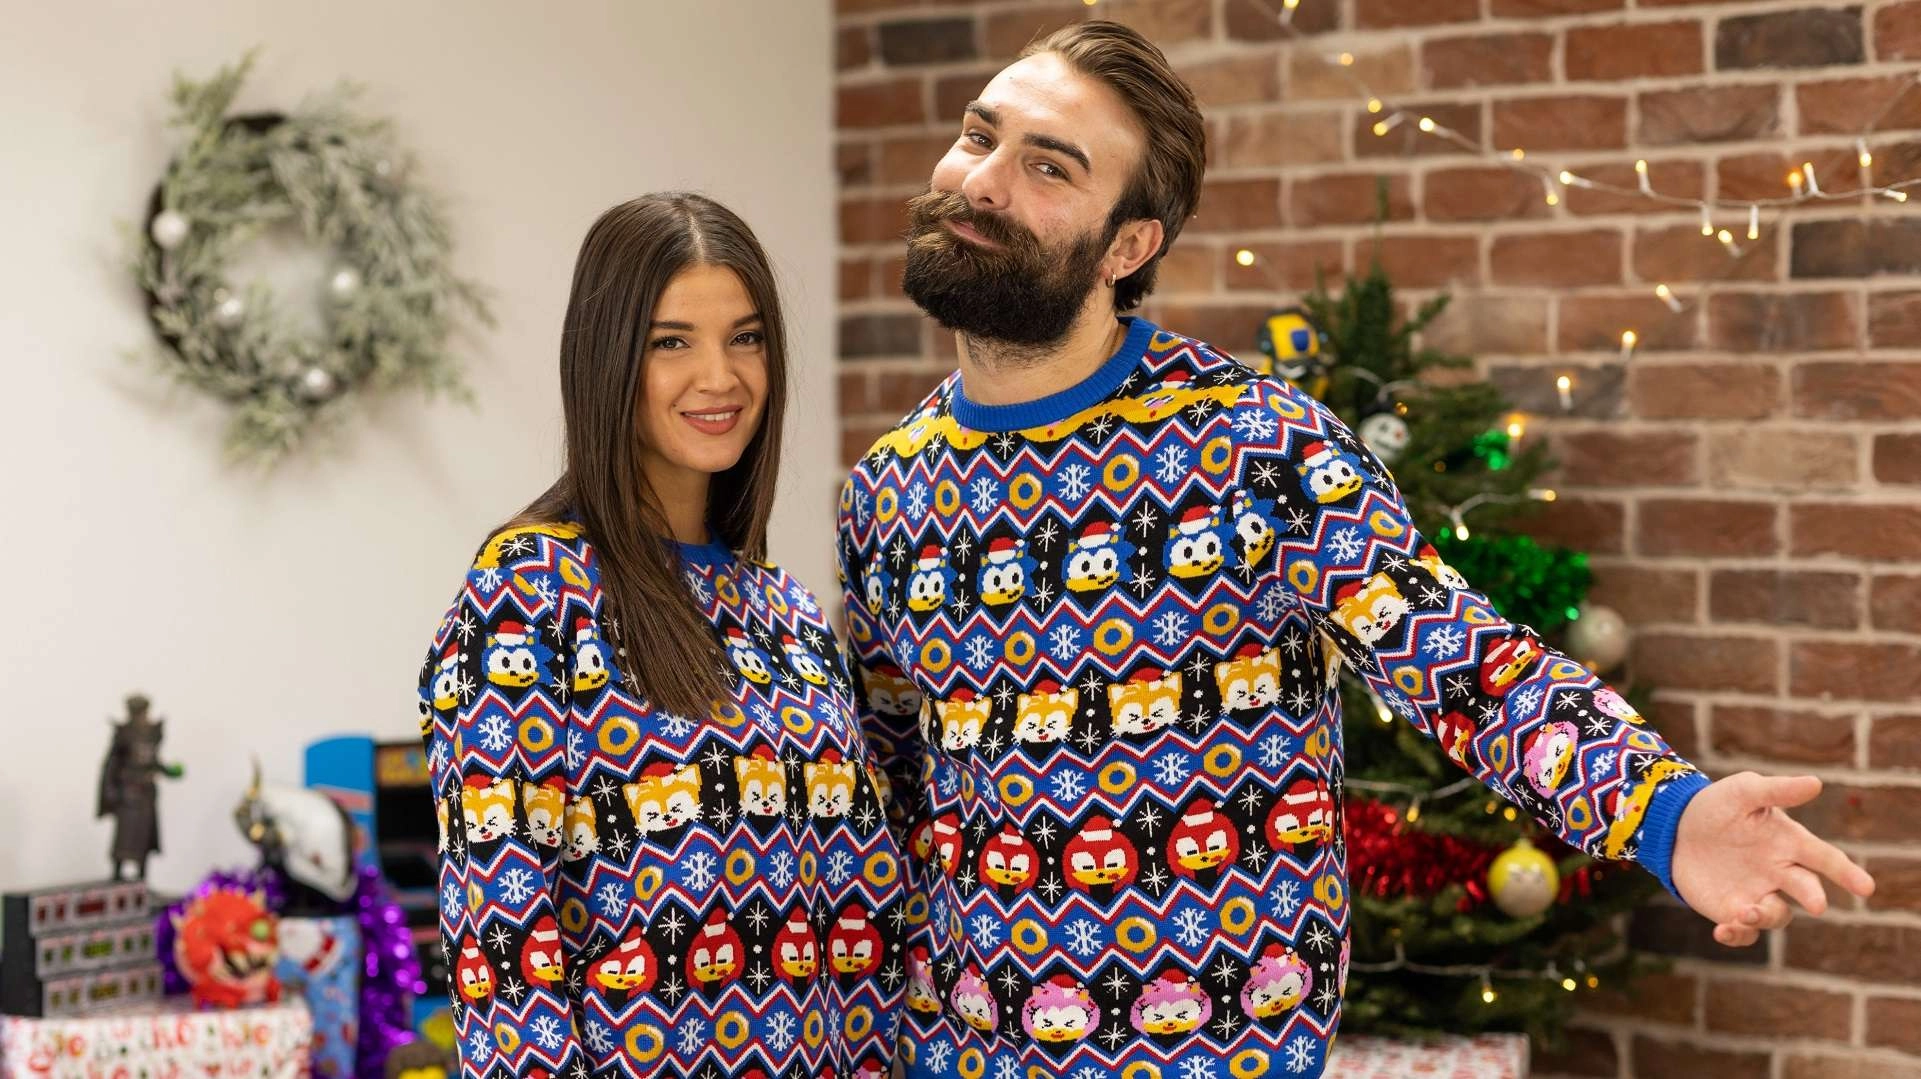 Just Geek jumpers ugly sweaters